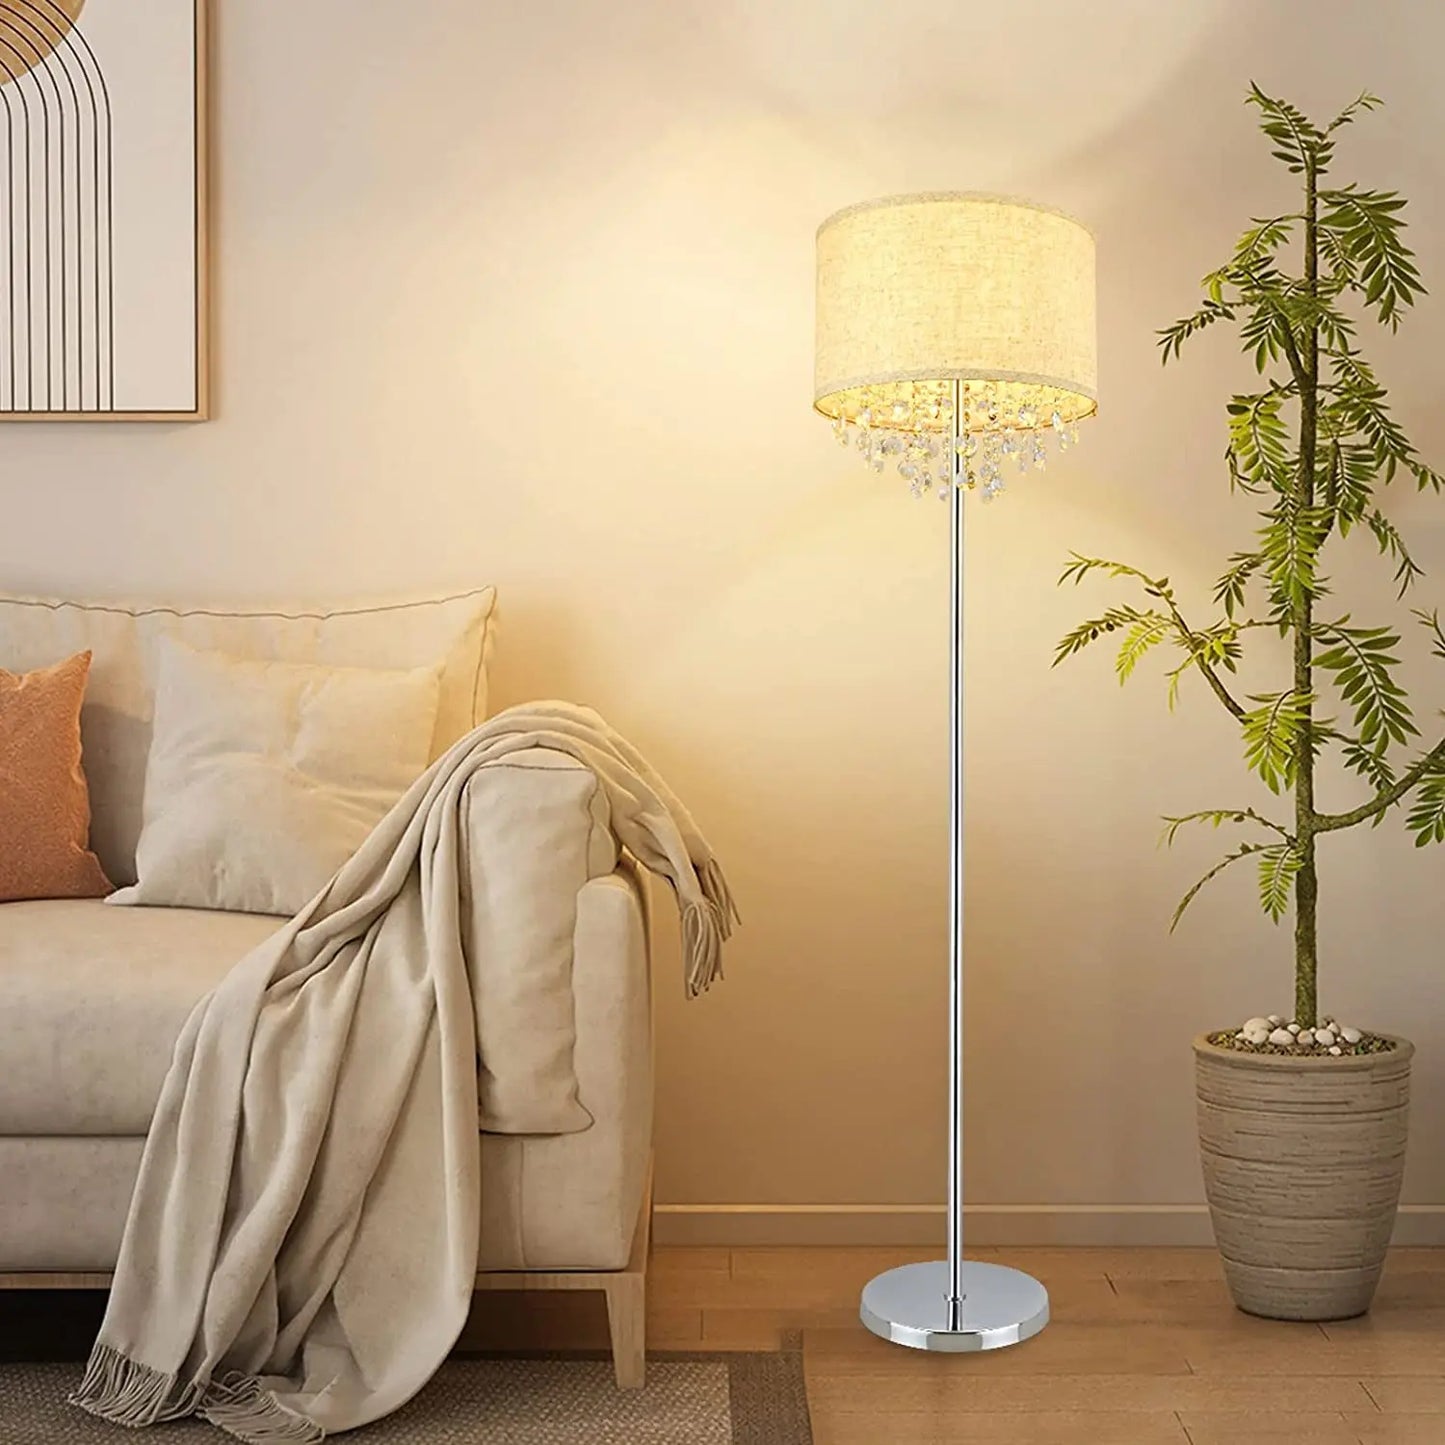 DLLT Crystal Floor Lamp for Living Room Modern Standing Lamp for Bedroom, Chrome Finish 64” Tall Pole LED Floor Lamp, 9W Bulb Included, Fabric Shade, Silver